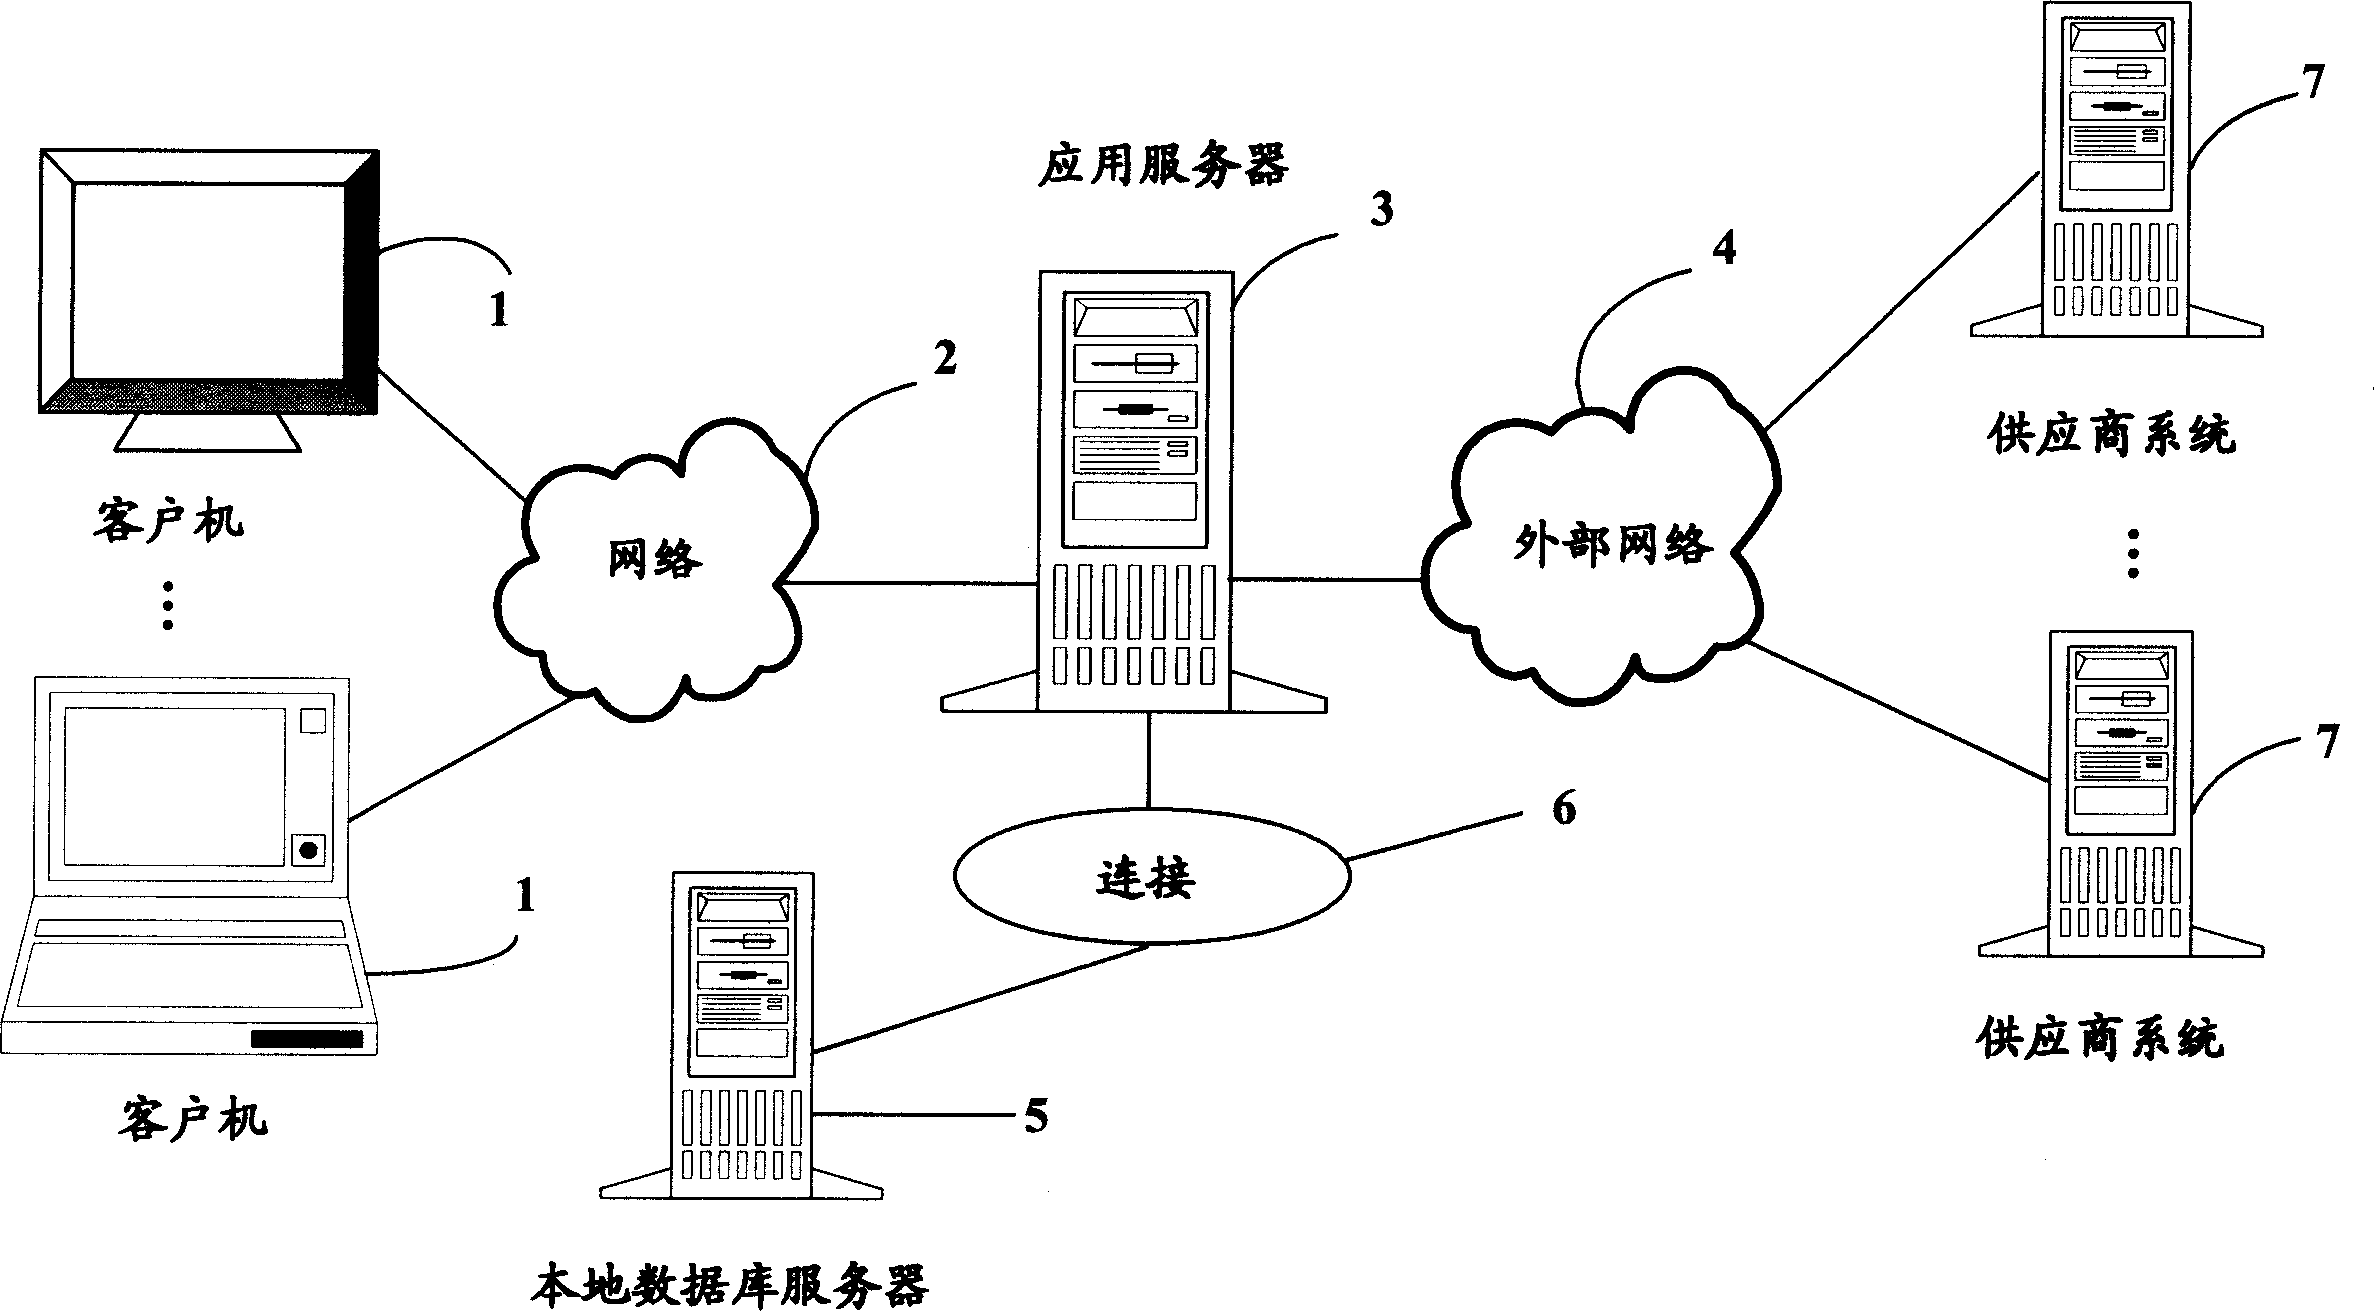 Purchasing management system and method